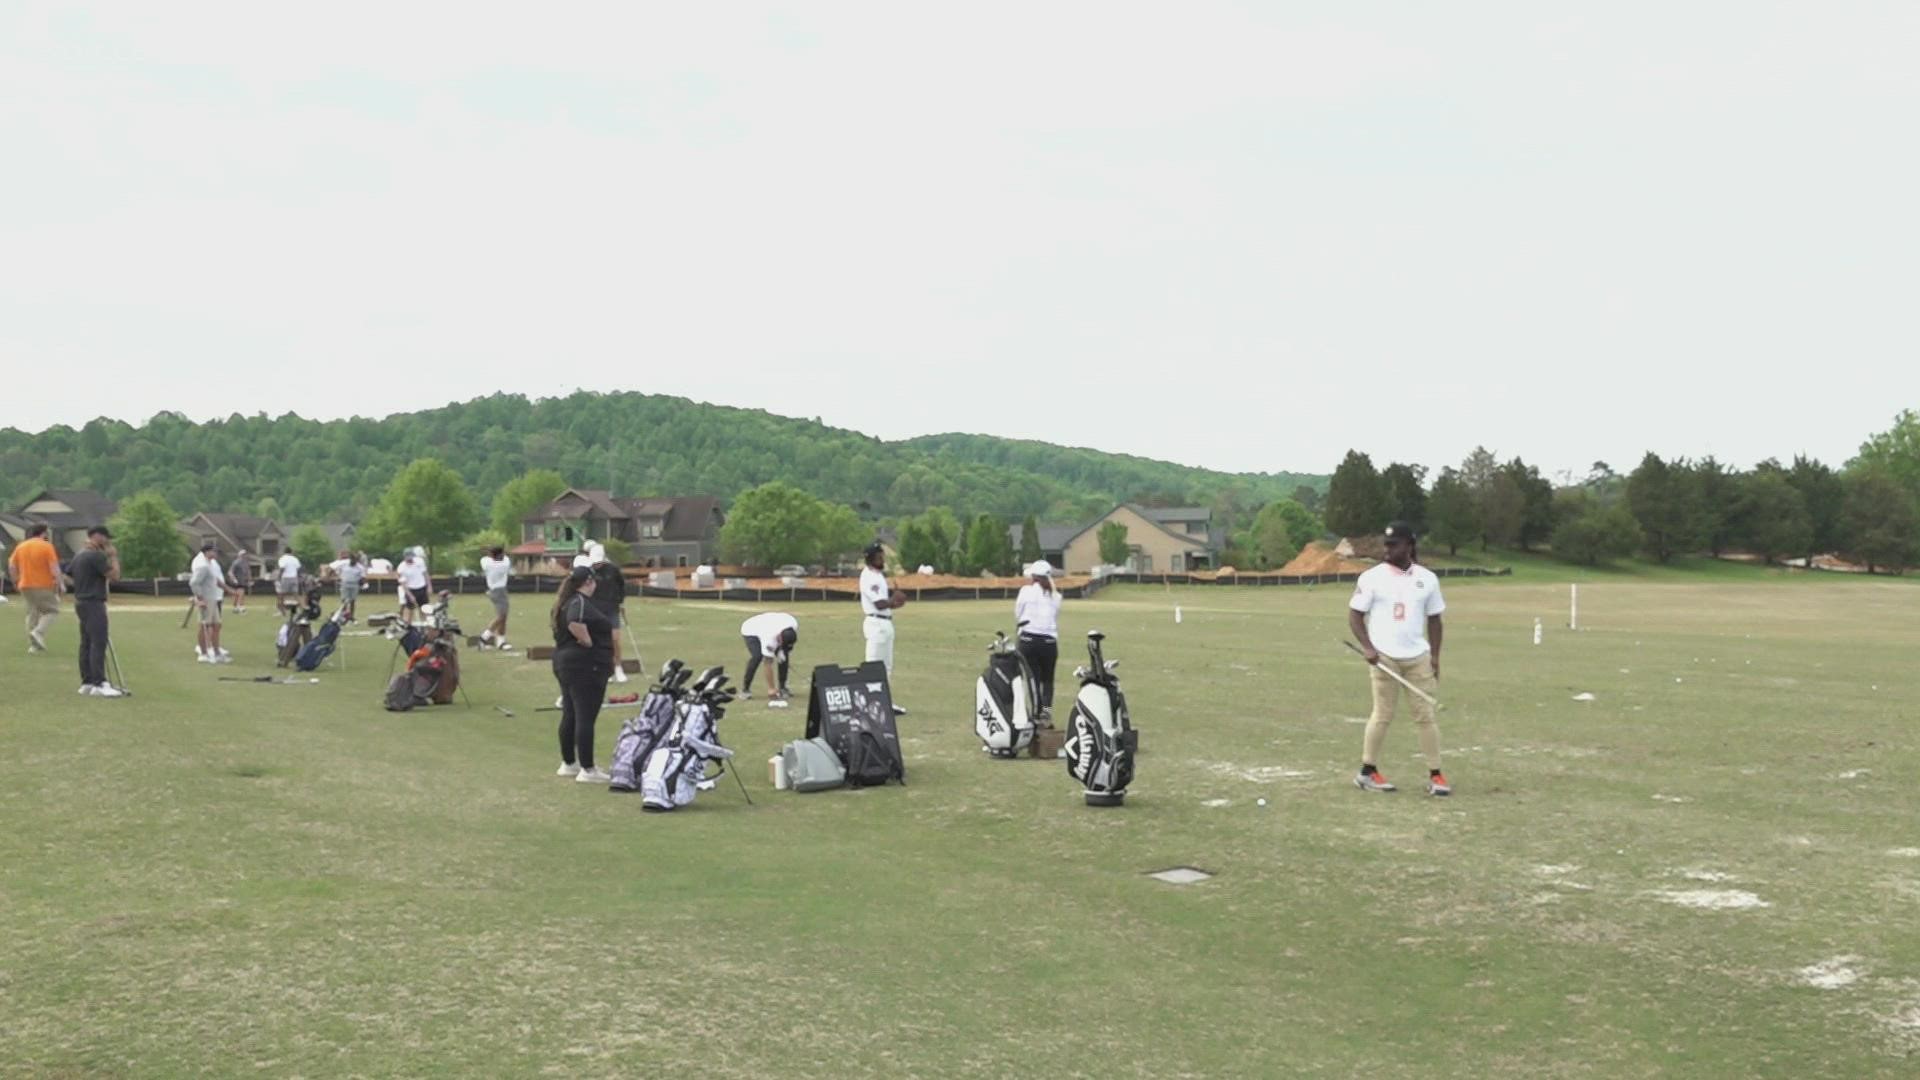 Former UT football player Josh Dobbs hosted the tournament along with Cam Sutton and Al Wilson.